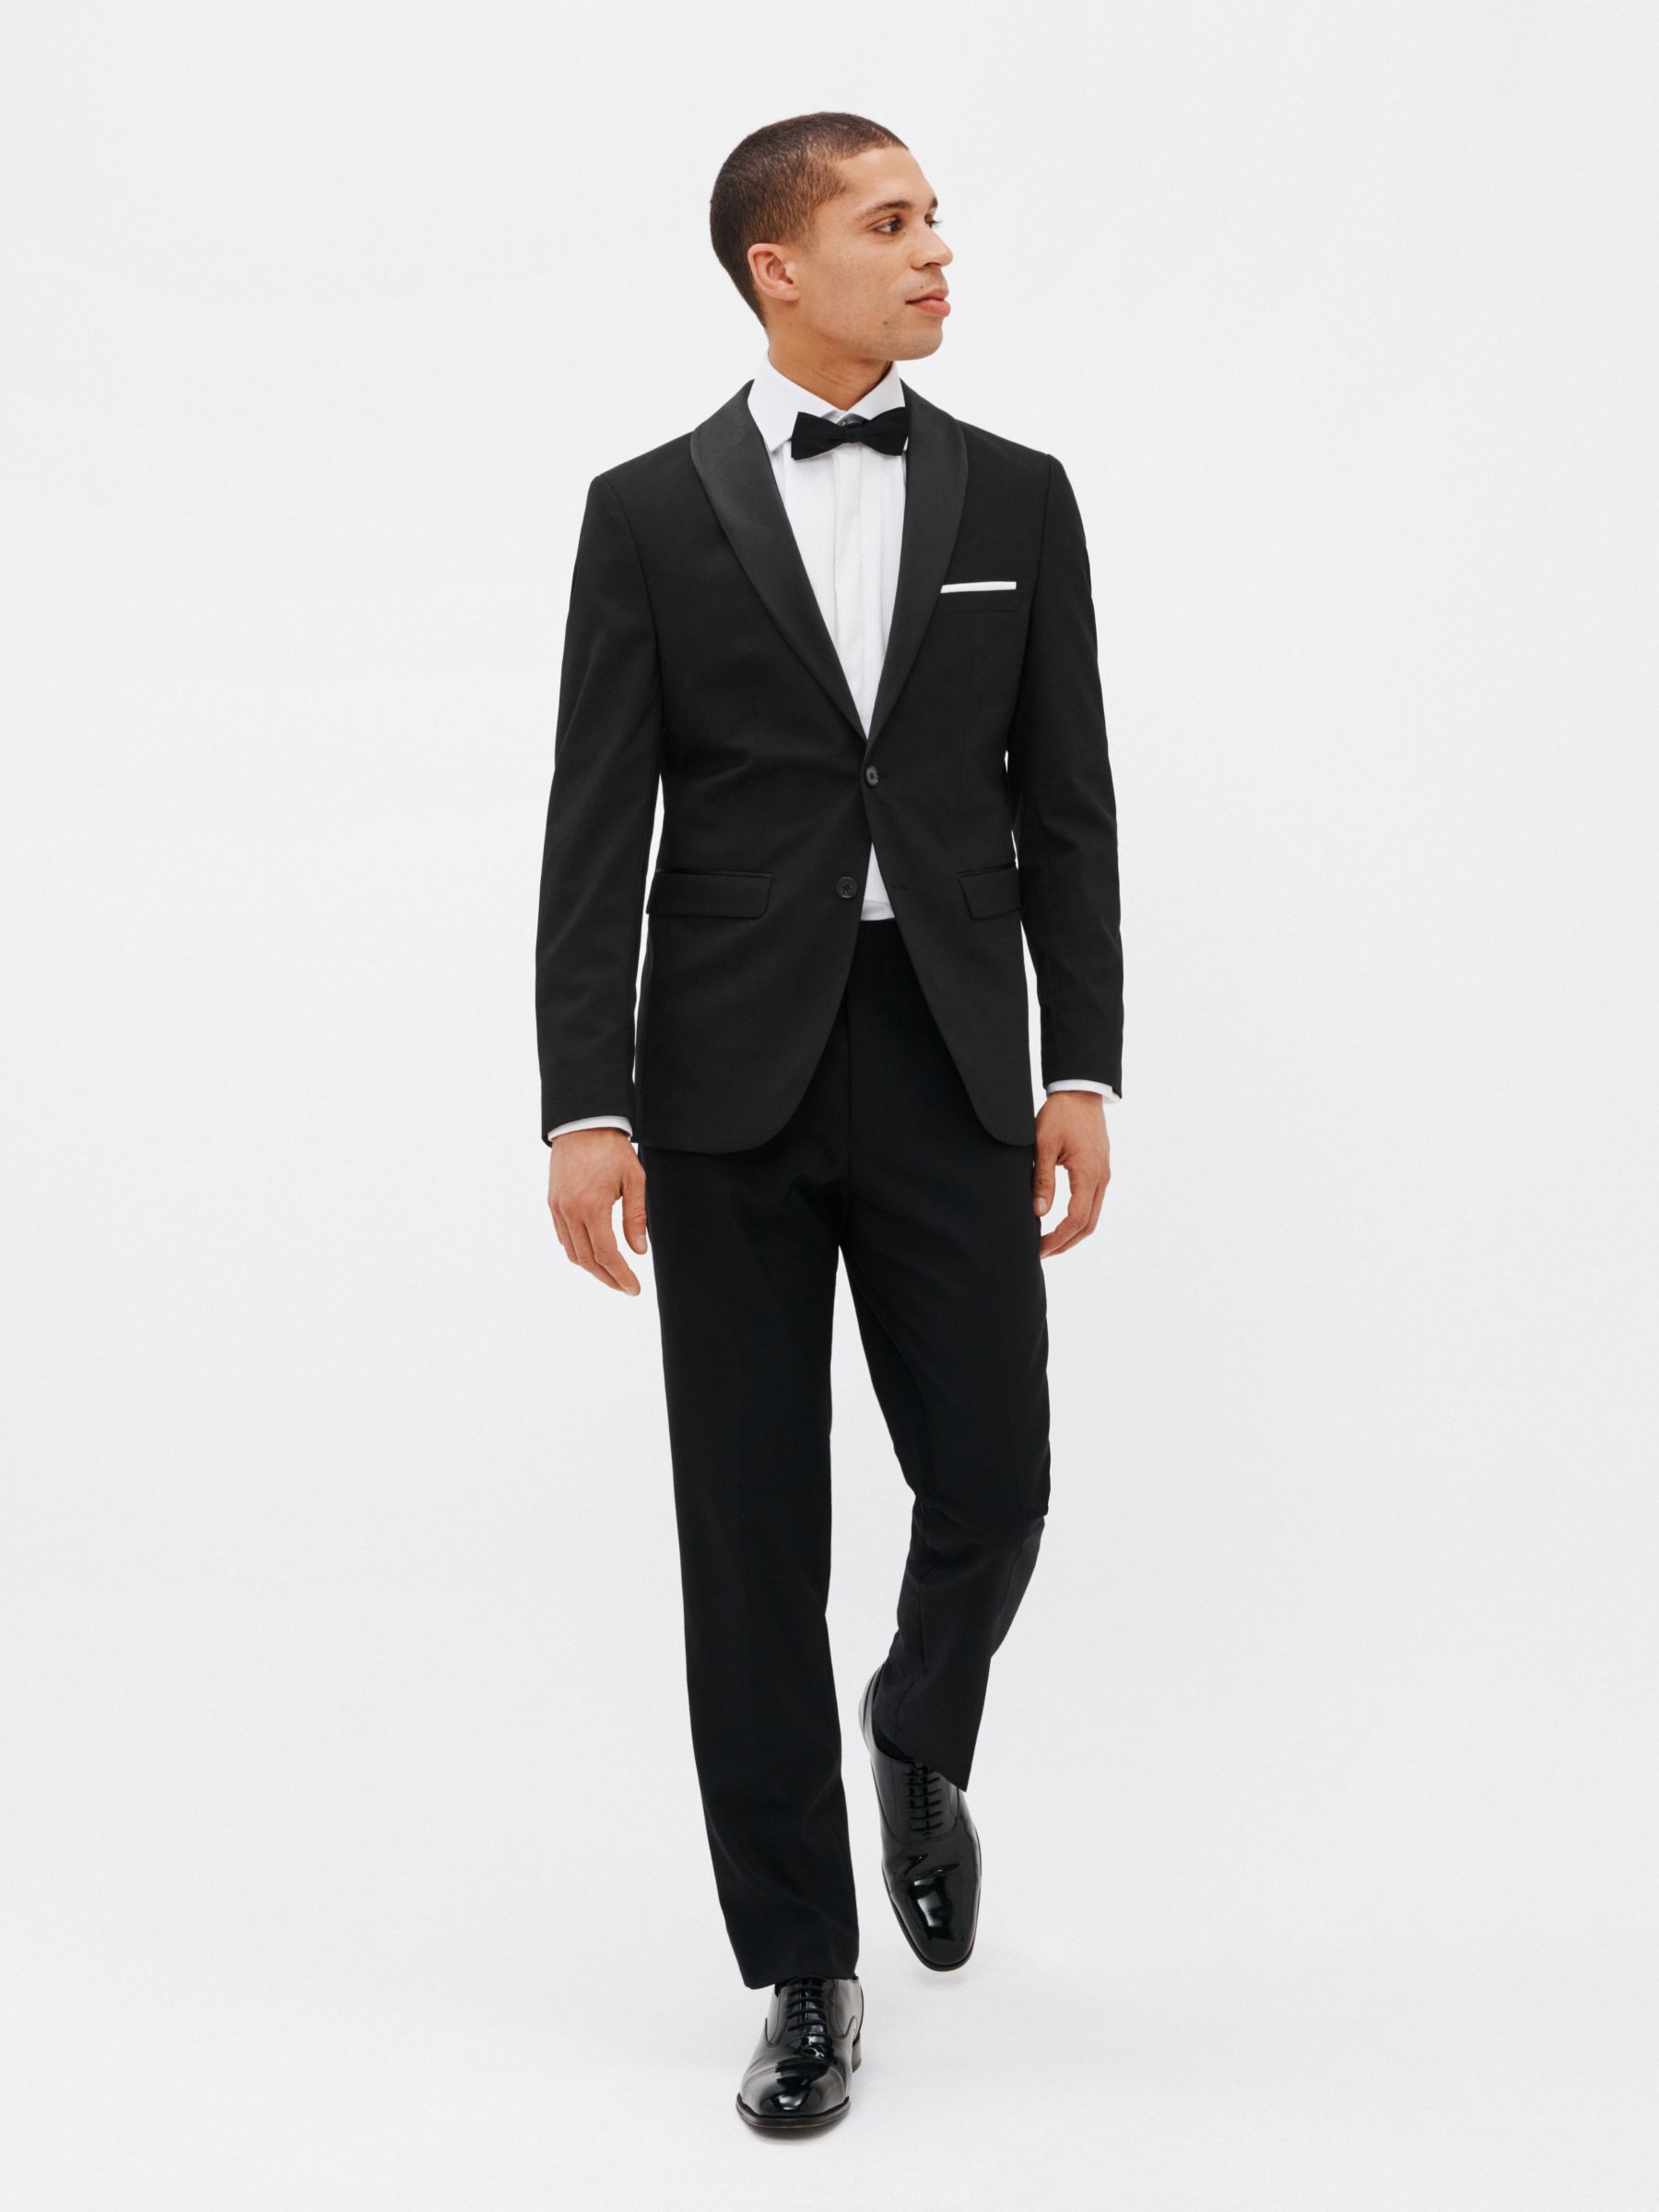 SELECTED HOMME Recycled Polyester Tux Dinner Jacket, Black, 36R